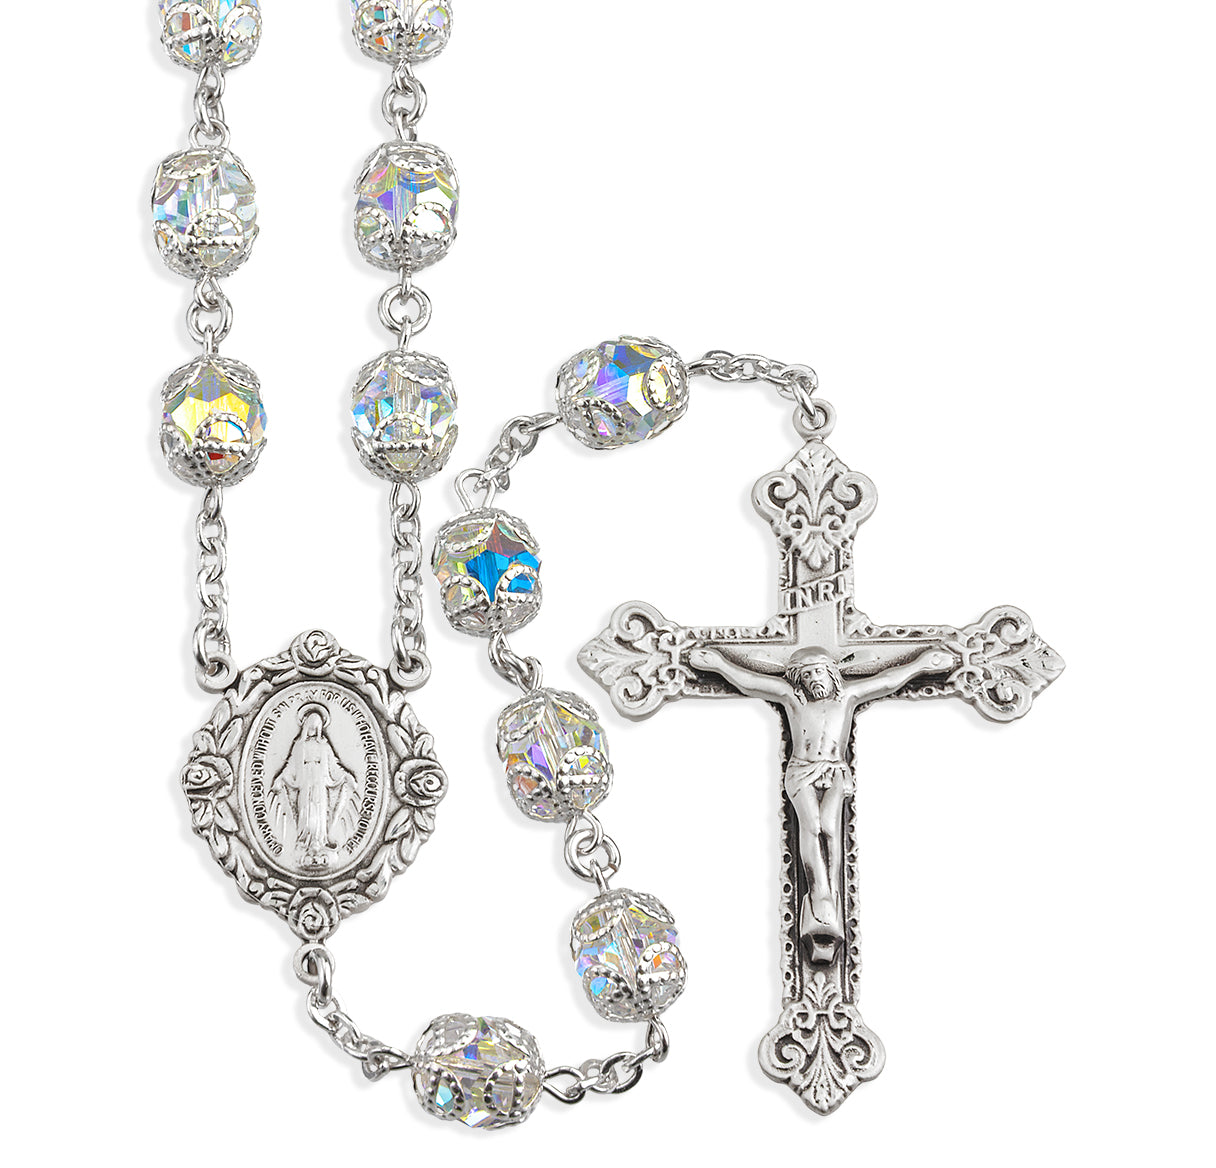 Sterling Silver Rosary Hand Made with Swarovski Crystal 8mm Aurora Borealis Double Capped Beads by HMH